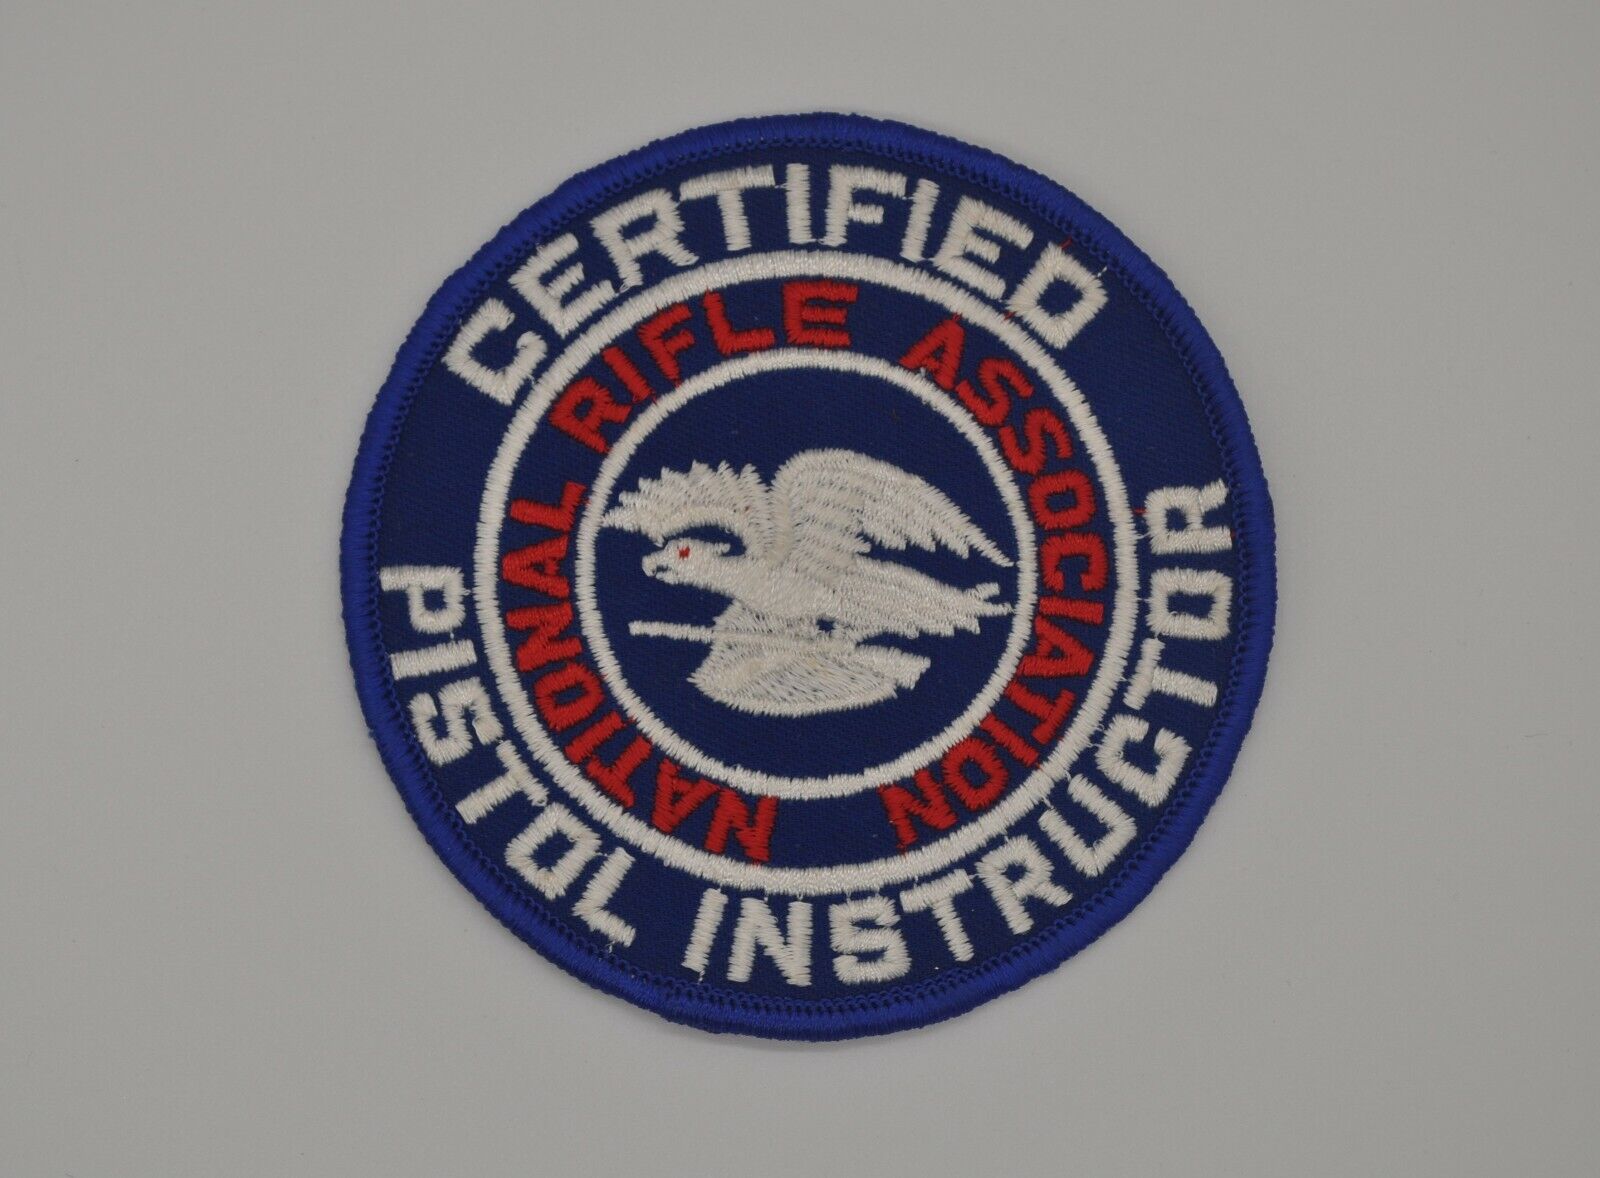 NRA National Rifle Association Certified Pistol Instructor Patch